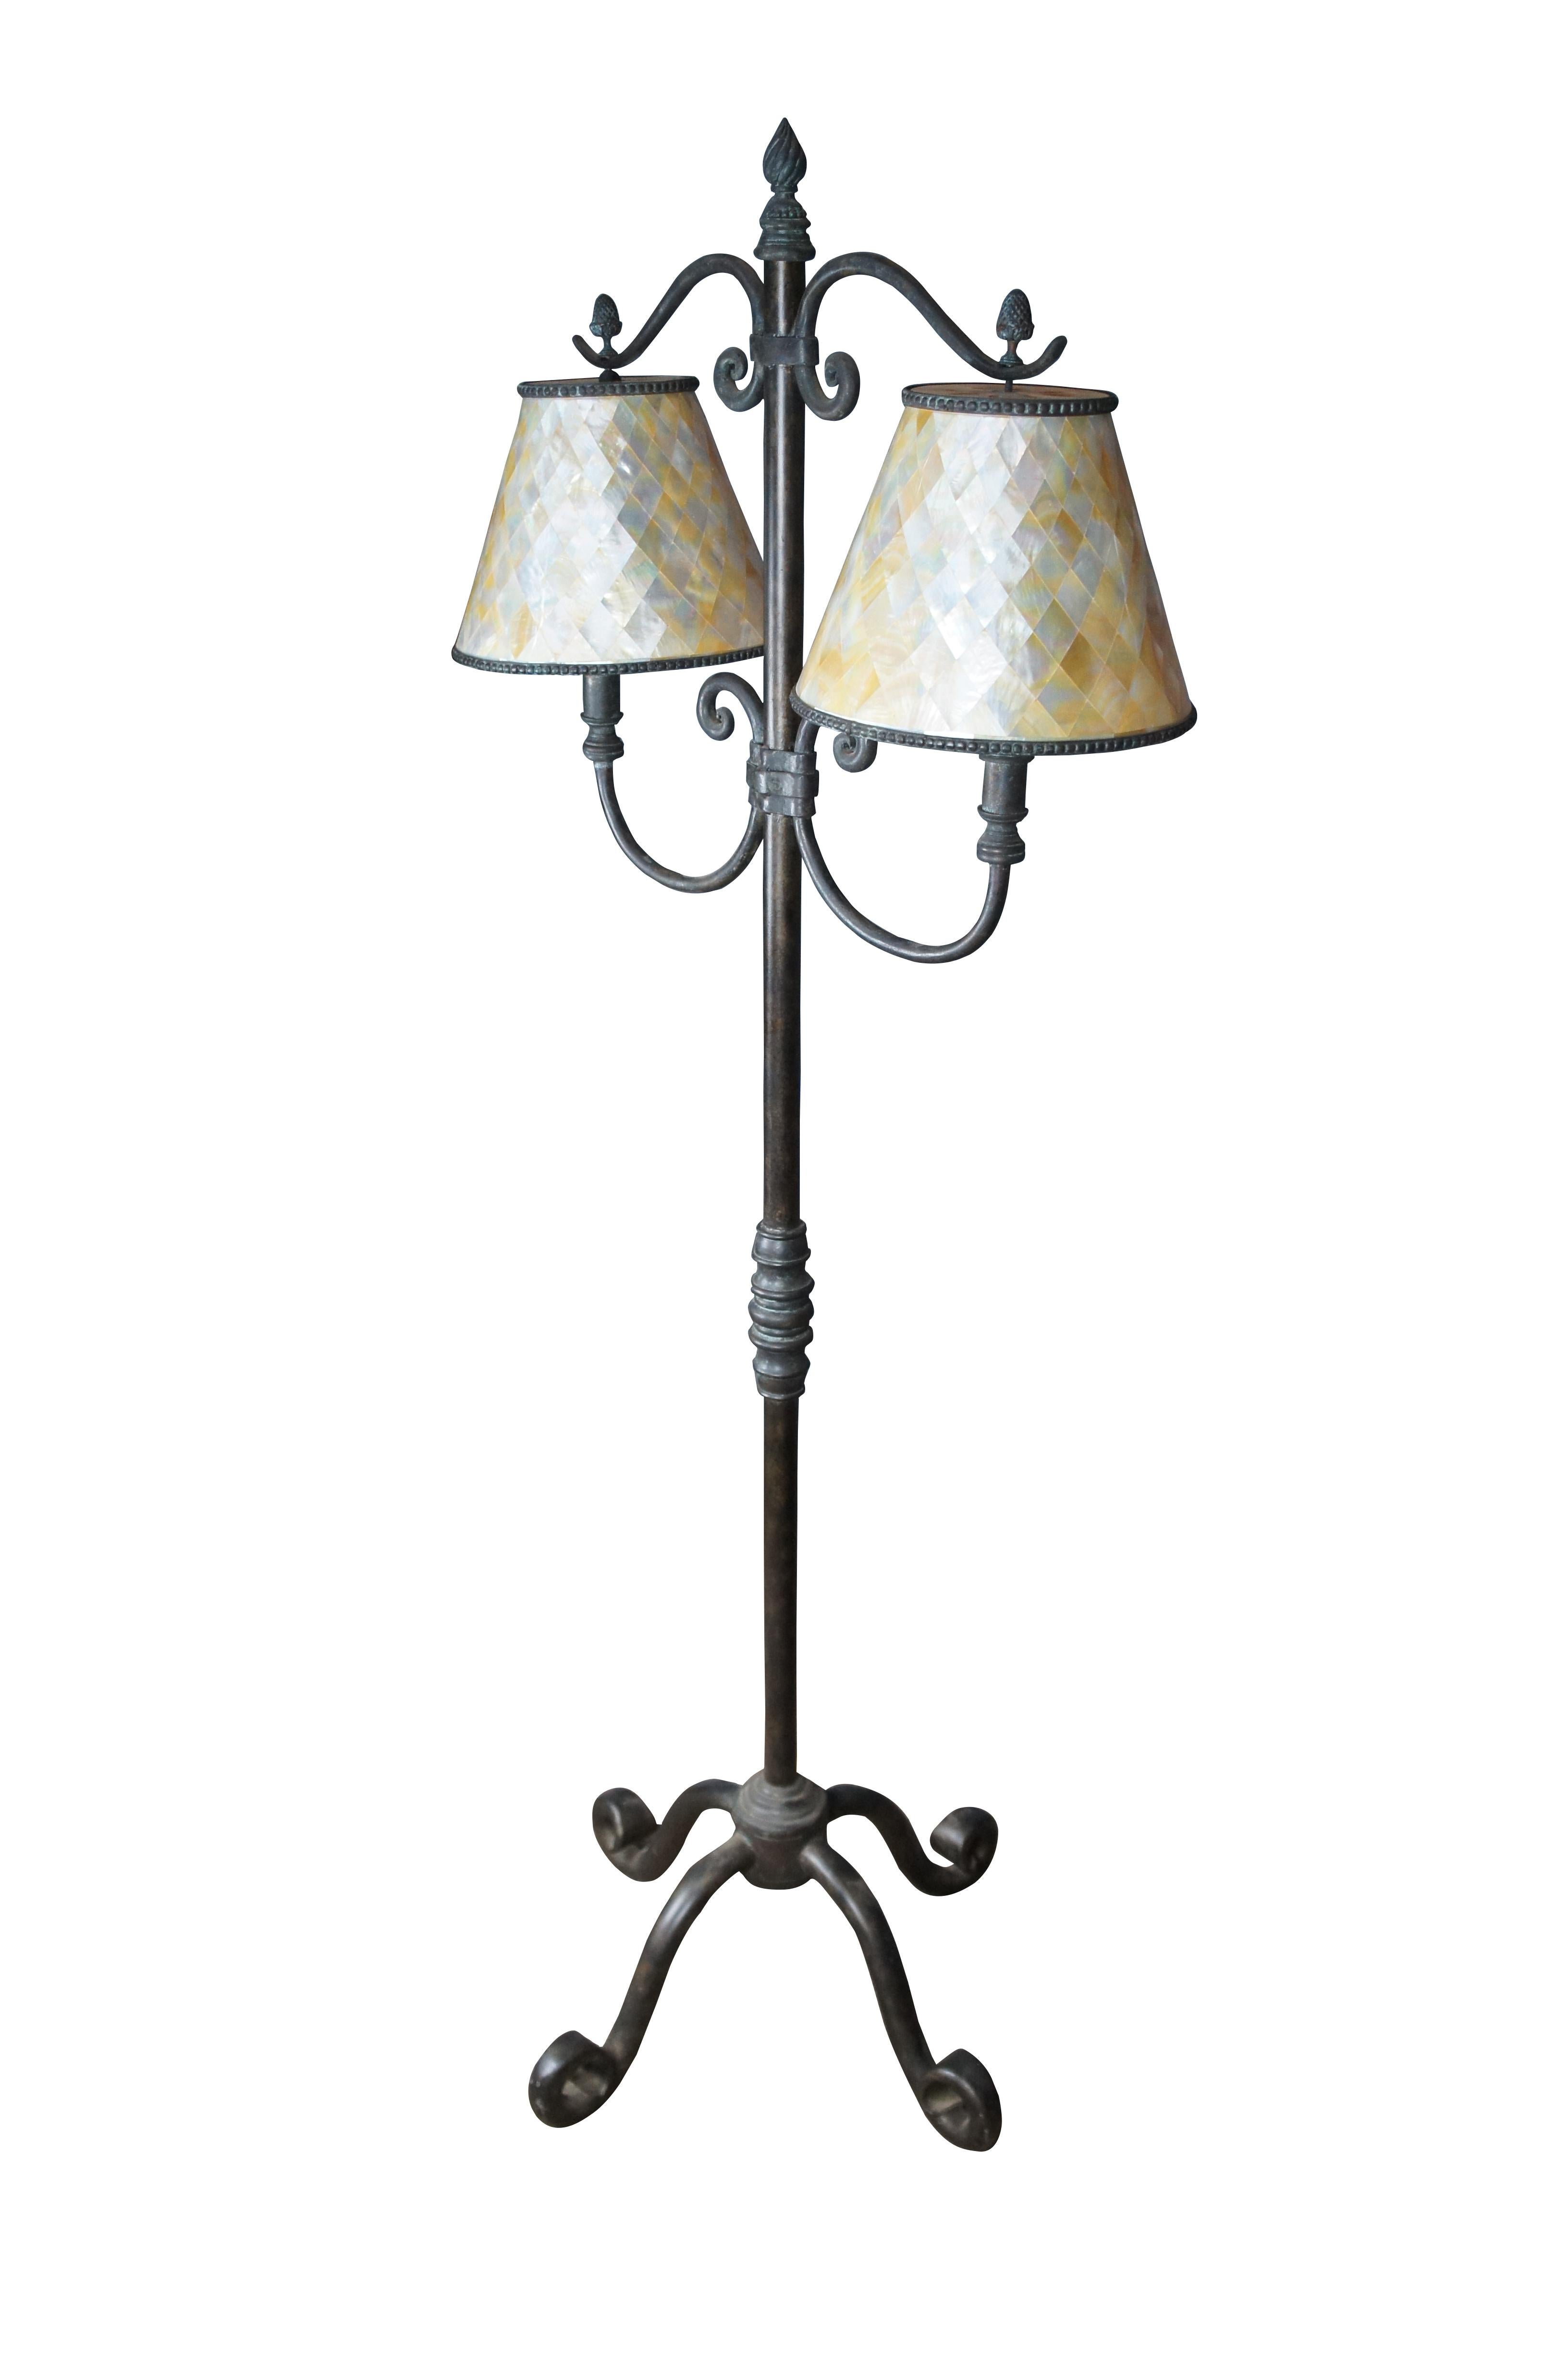 An impressive Iron Floor Lamp Handmade by Maitland Smtih. Features a rich patinated finish with scrolled accents and two Mother of Pearl hanging shades with Tessellated Harlequin pattern. Finial is twisted in a torchiere shape. The lamp is supported